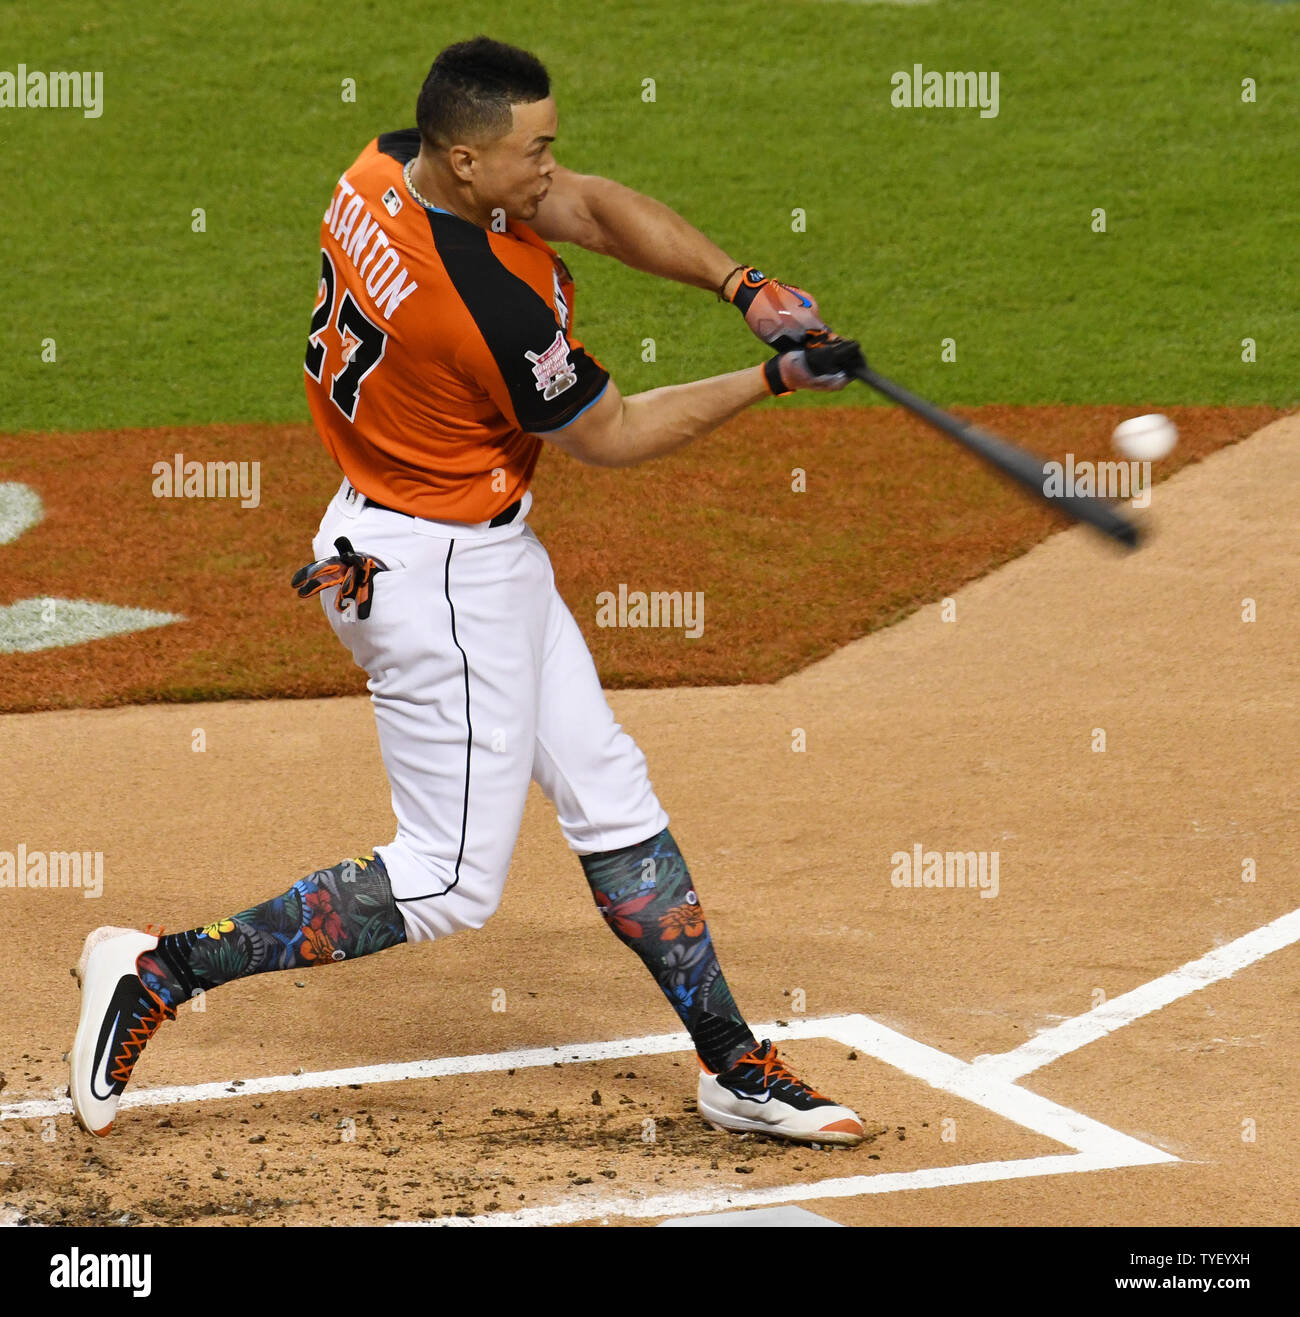 Miami Marlins Giancarlo Stanton hits a home run in the first round of the  2017 MLB home run derby at Marlins Park in Miami, Florida on July 10, 201.  New York Yankees